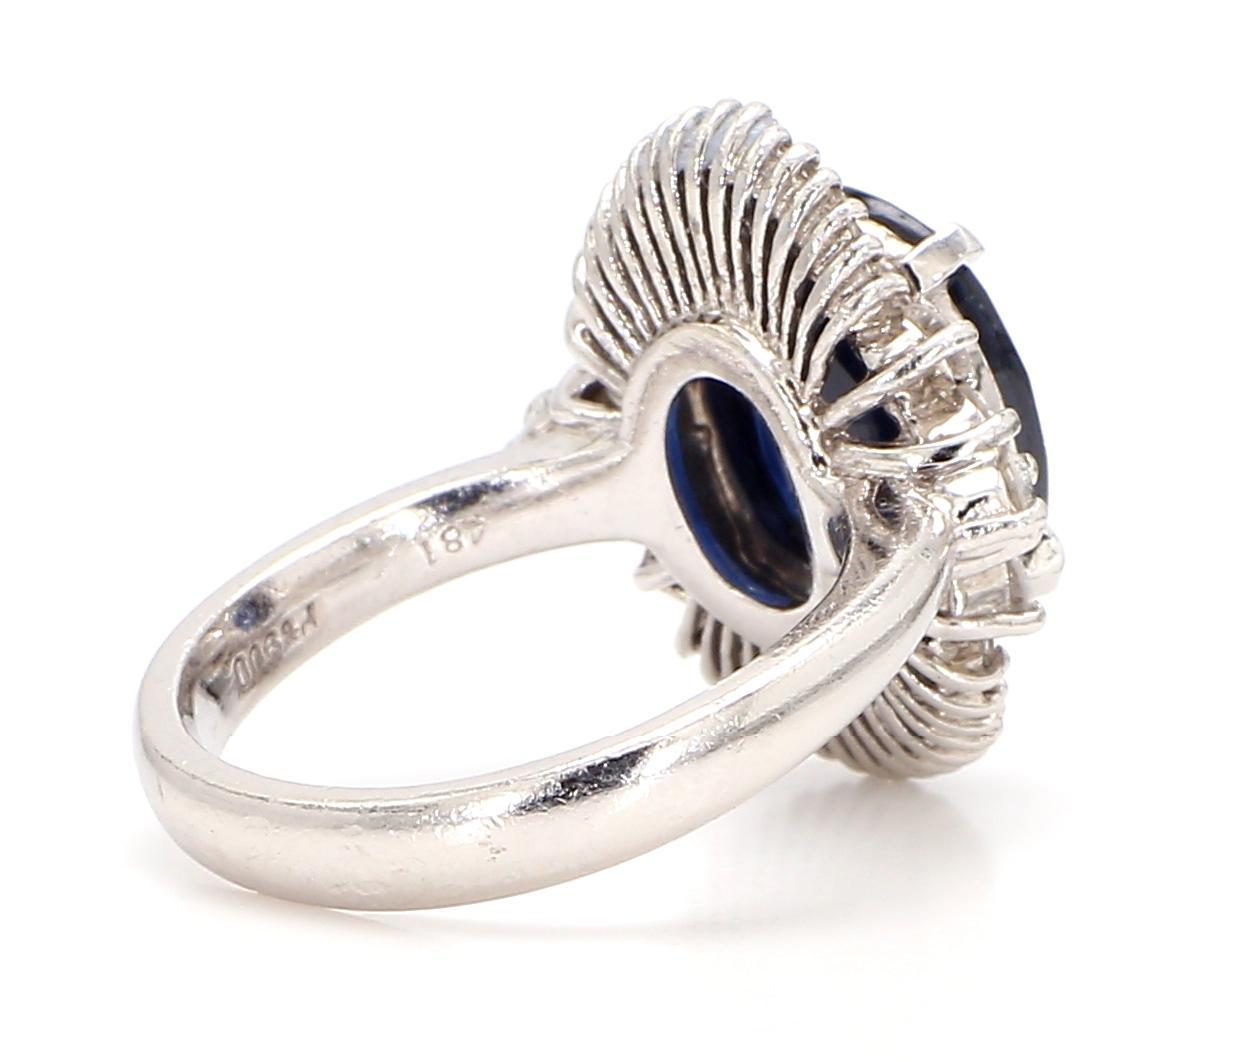 Women's GIA Certified 4.2 Carat Blue Sapphire and 1.5 Carat Diamond Cocktail Ring For Sale